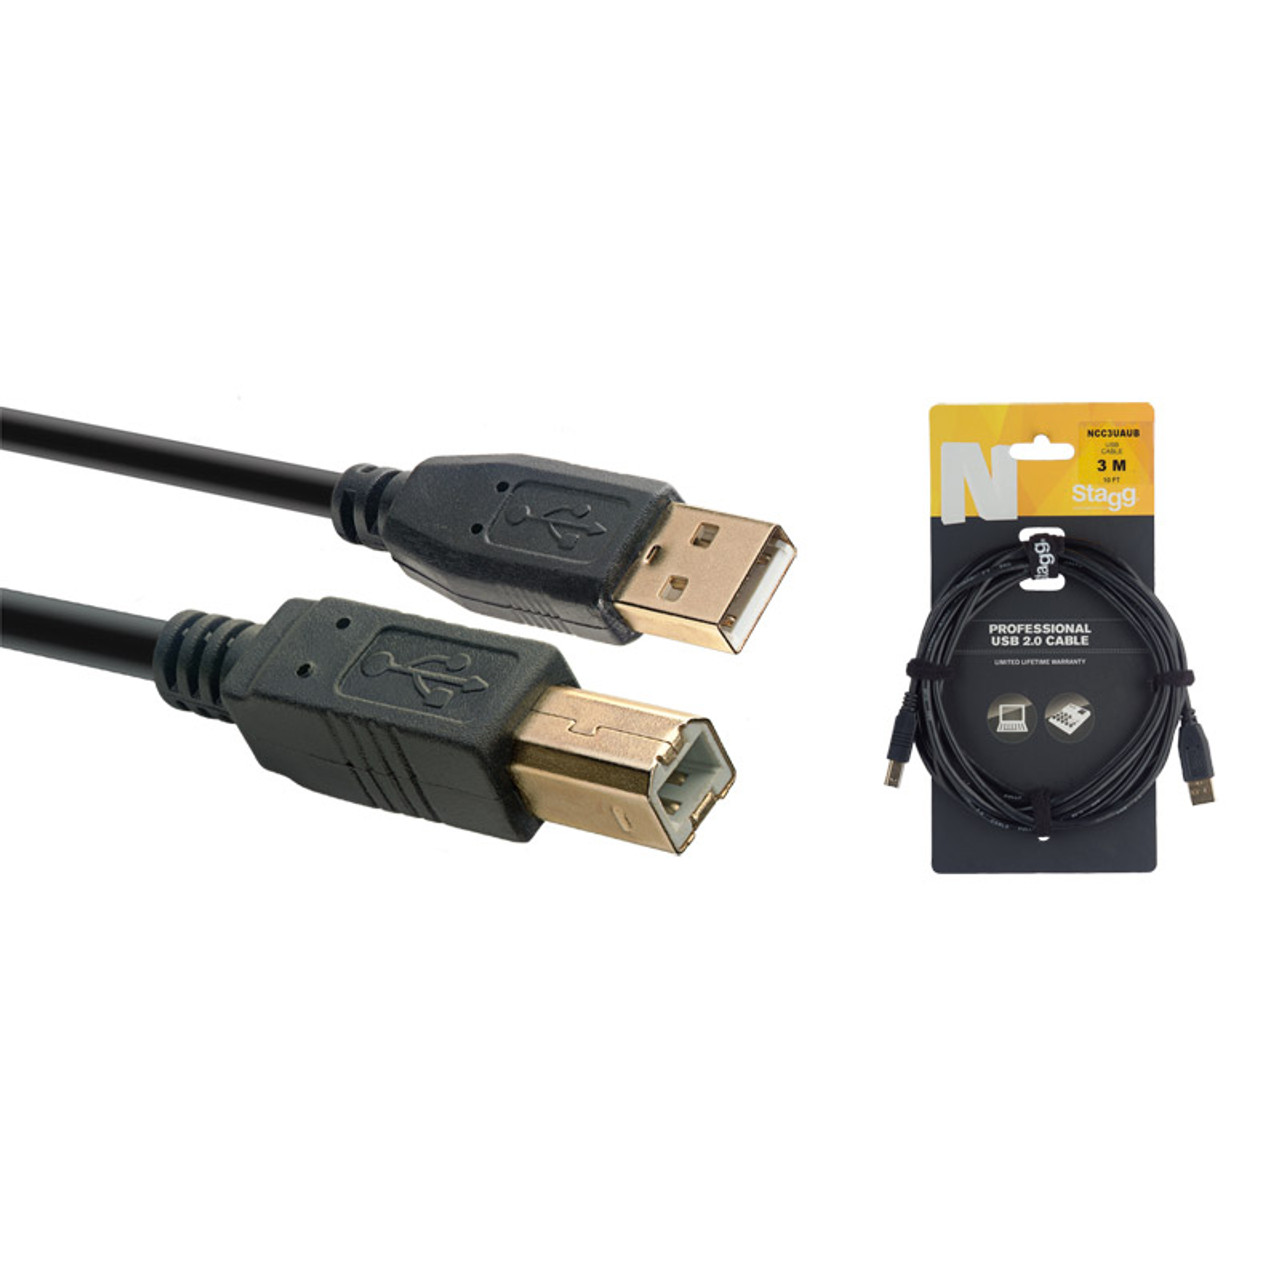 USB-C to USB-C Cable - M/M - 3 m (10 ft.) - USB 2.0